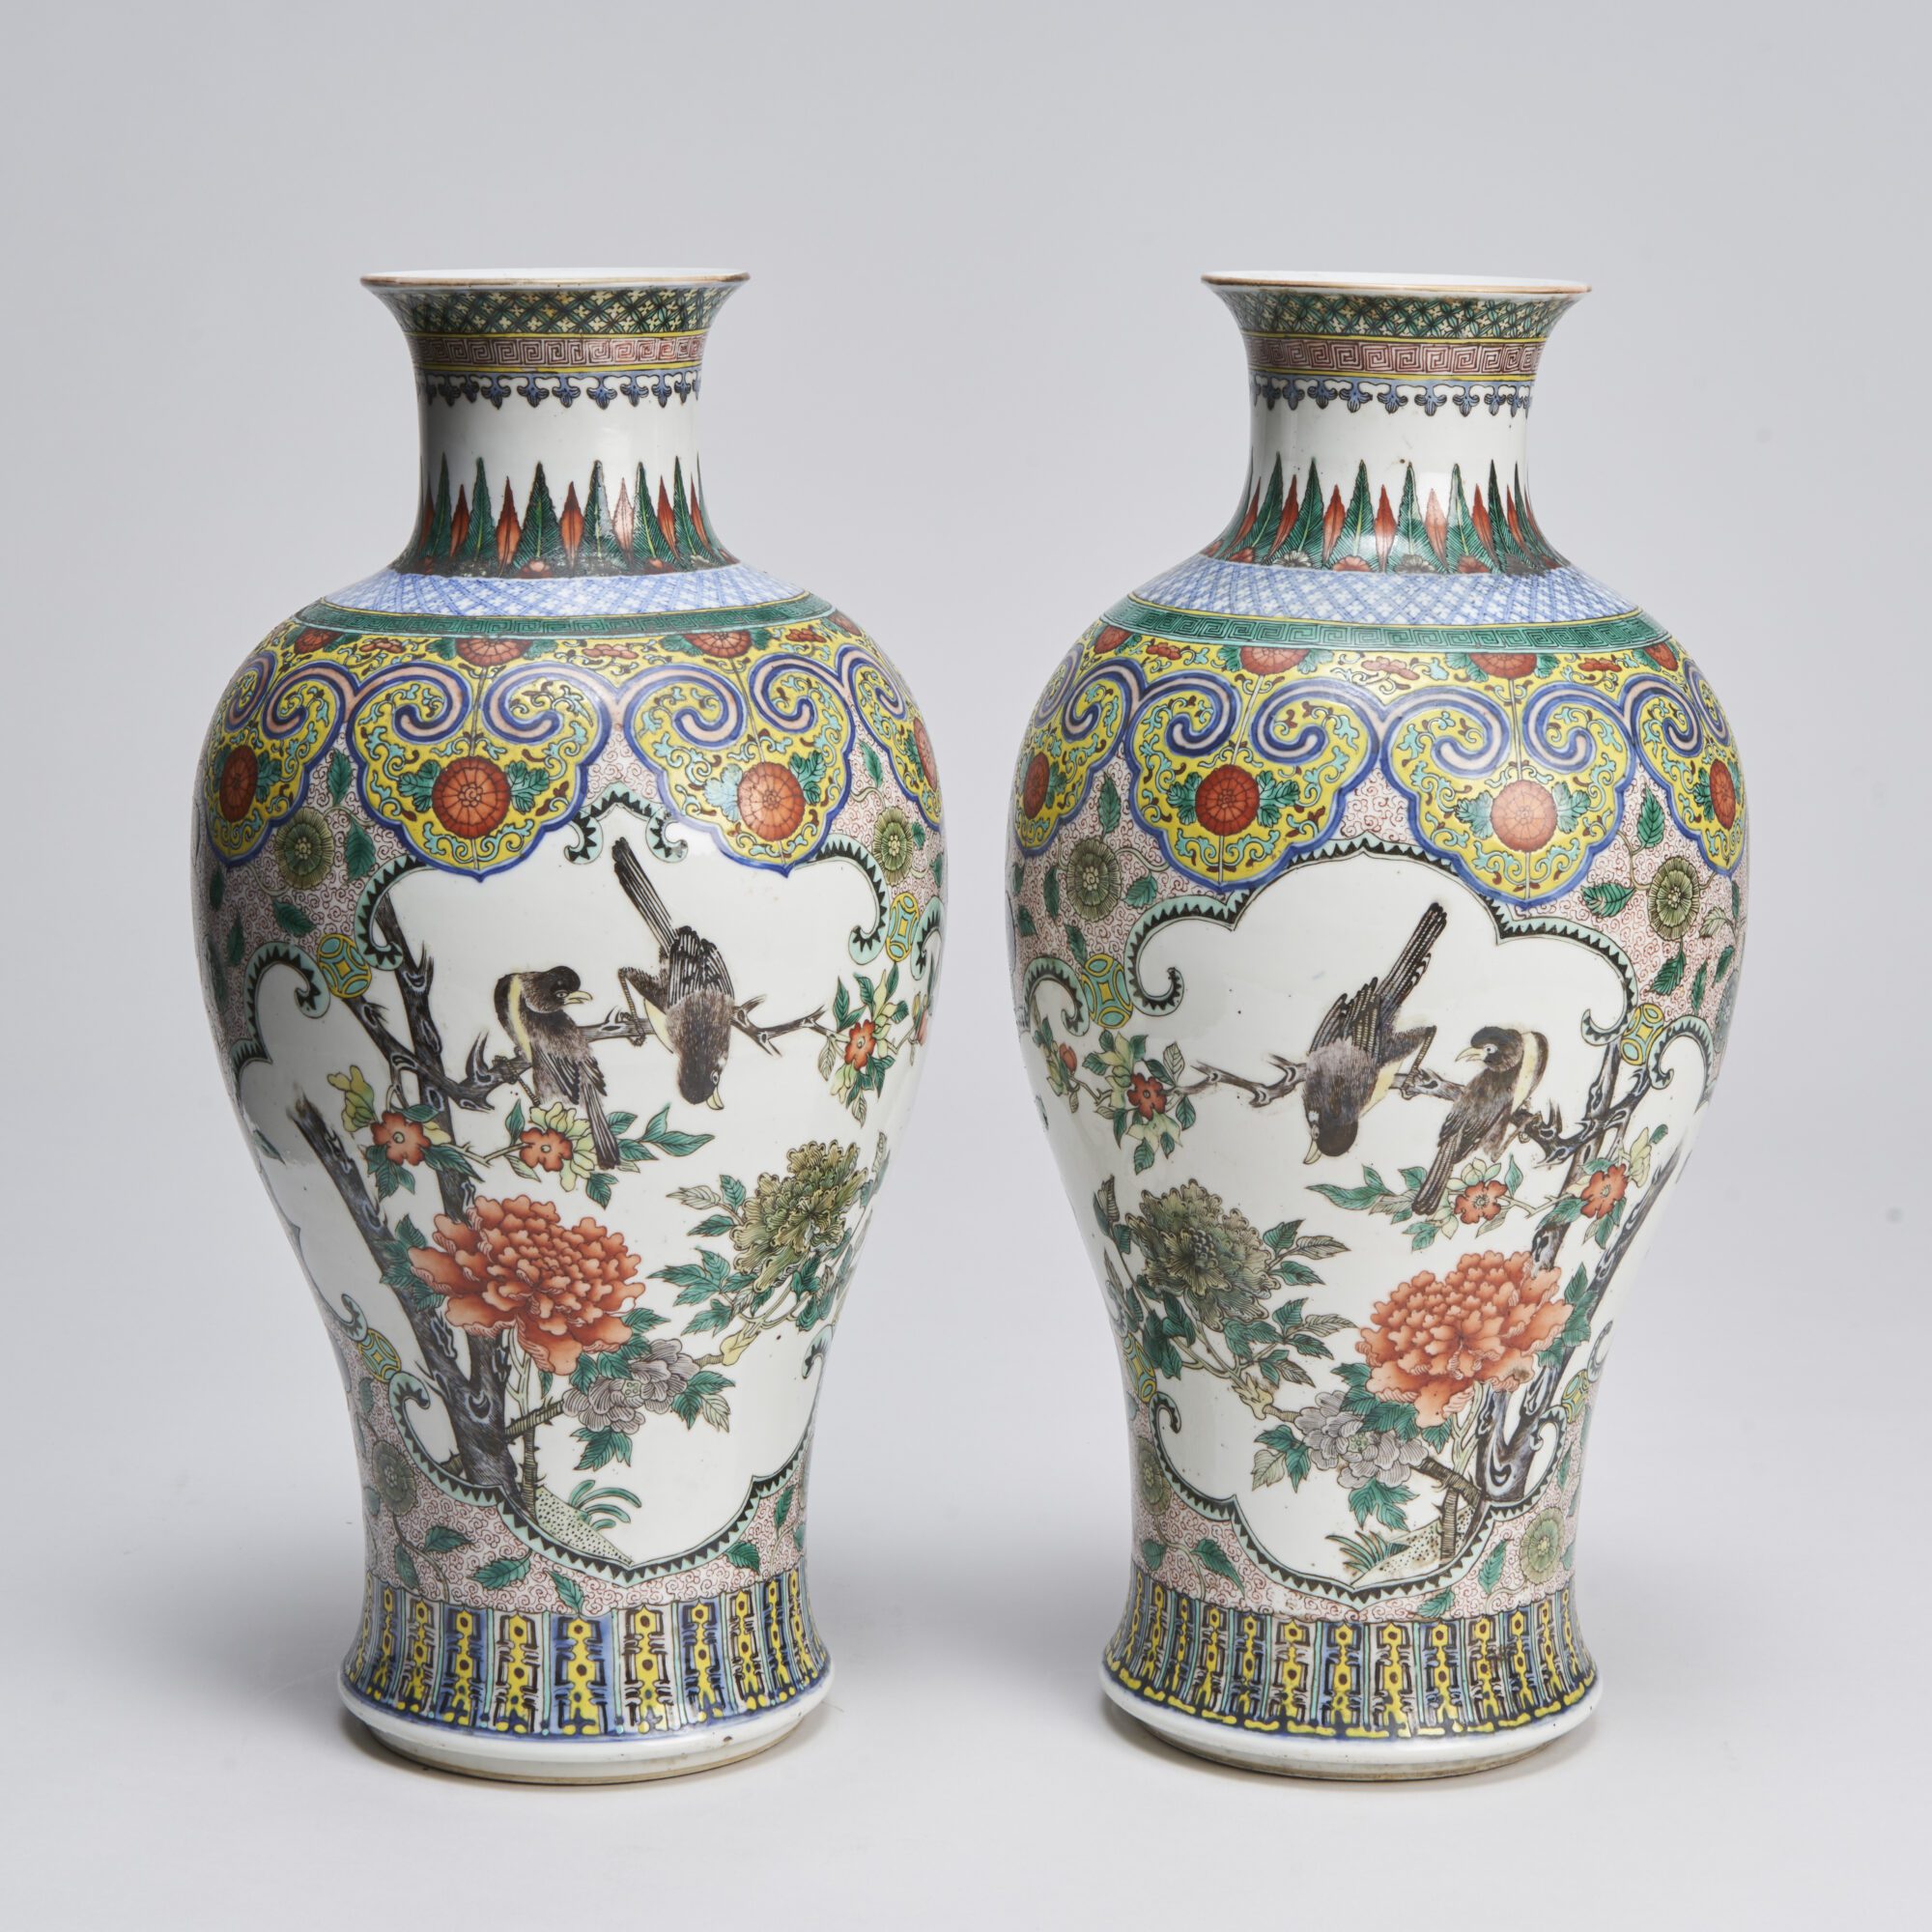 An attractive pair of Nineteenth Century Chinese Famille Verte porcelain vases from Kevin Page